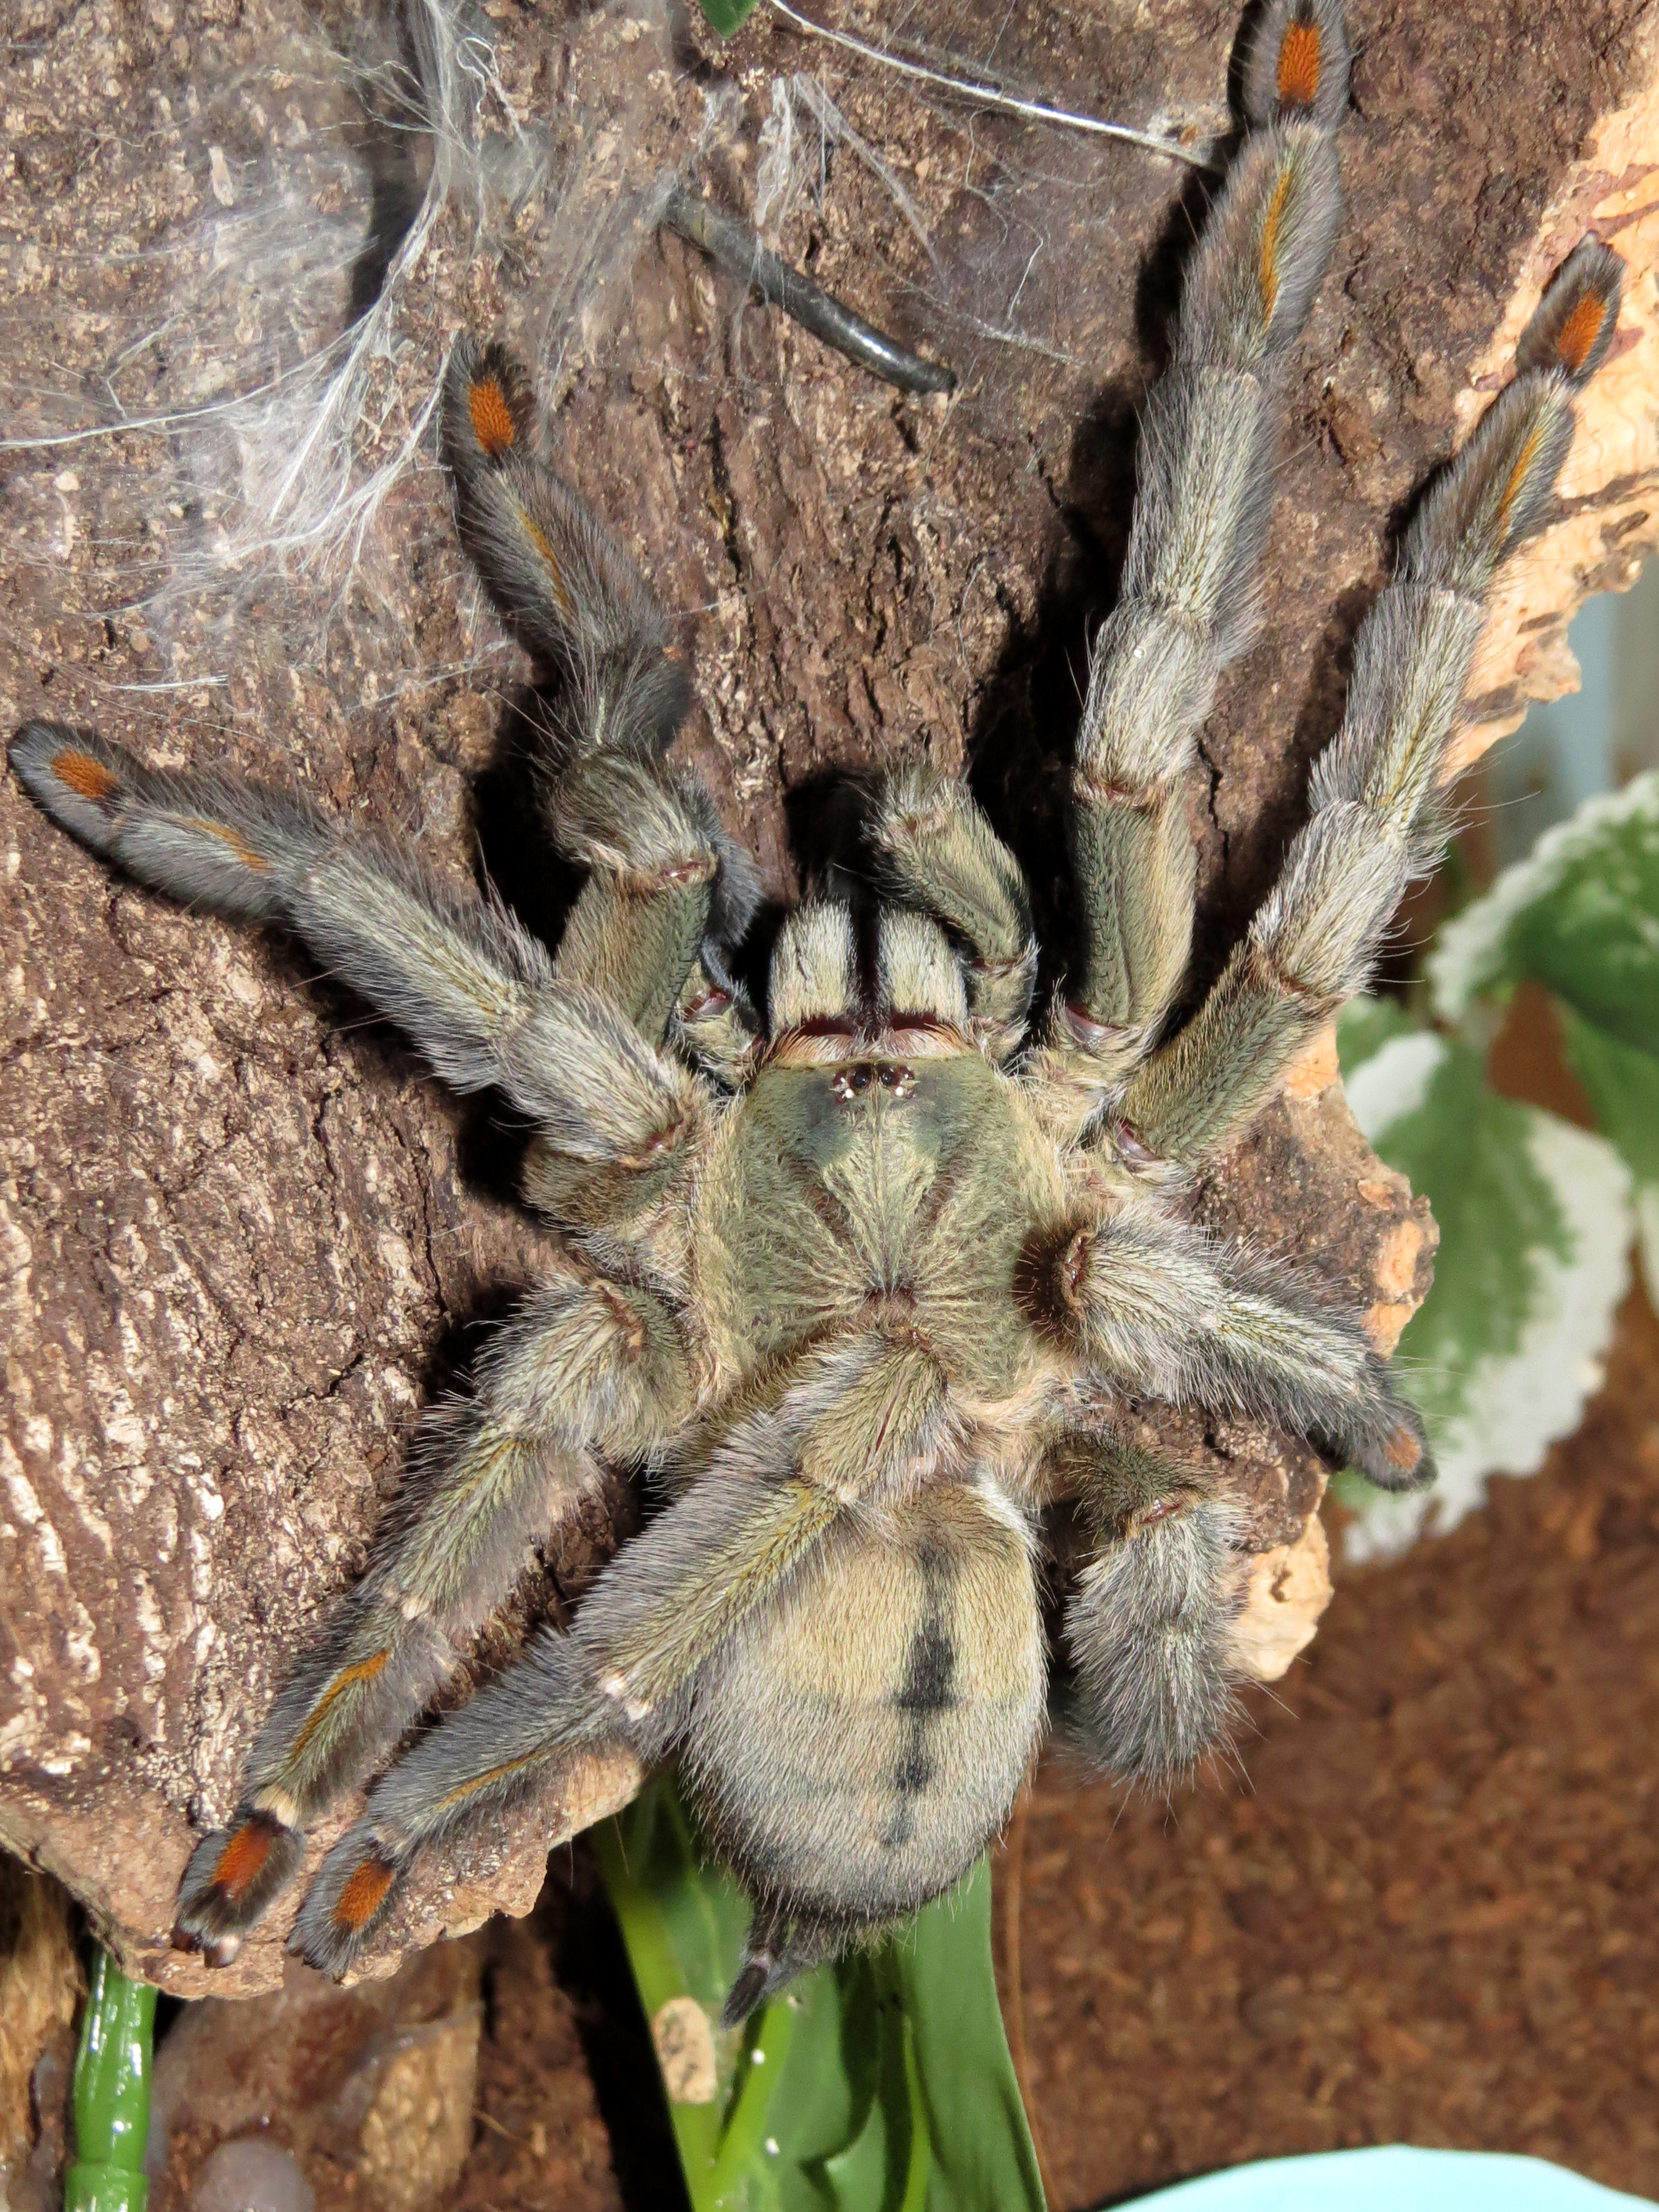 Not Such a Little Squirt Anymore (♀ Psalmopoeus cambridgei 6")